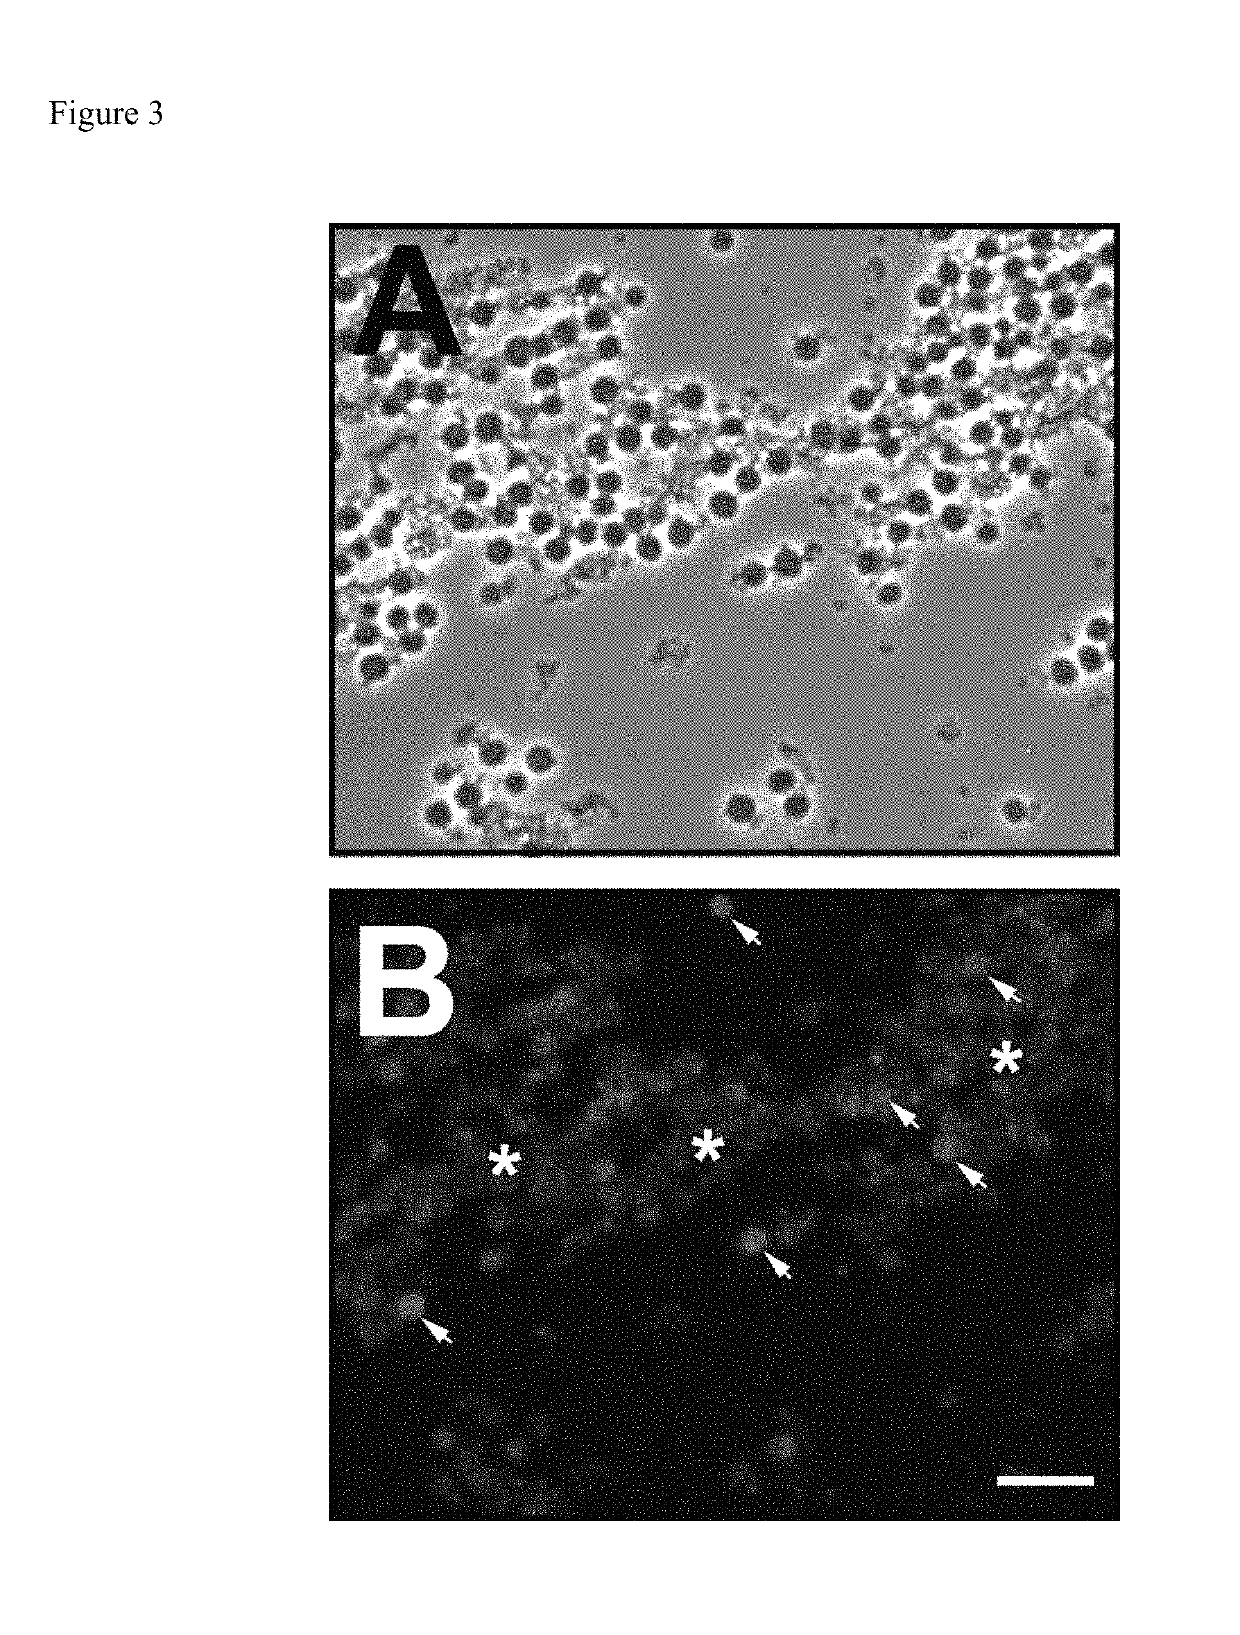 Method for the rapid and convenient detection and enumeration of neutrophils in biological samples